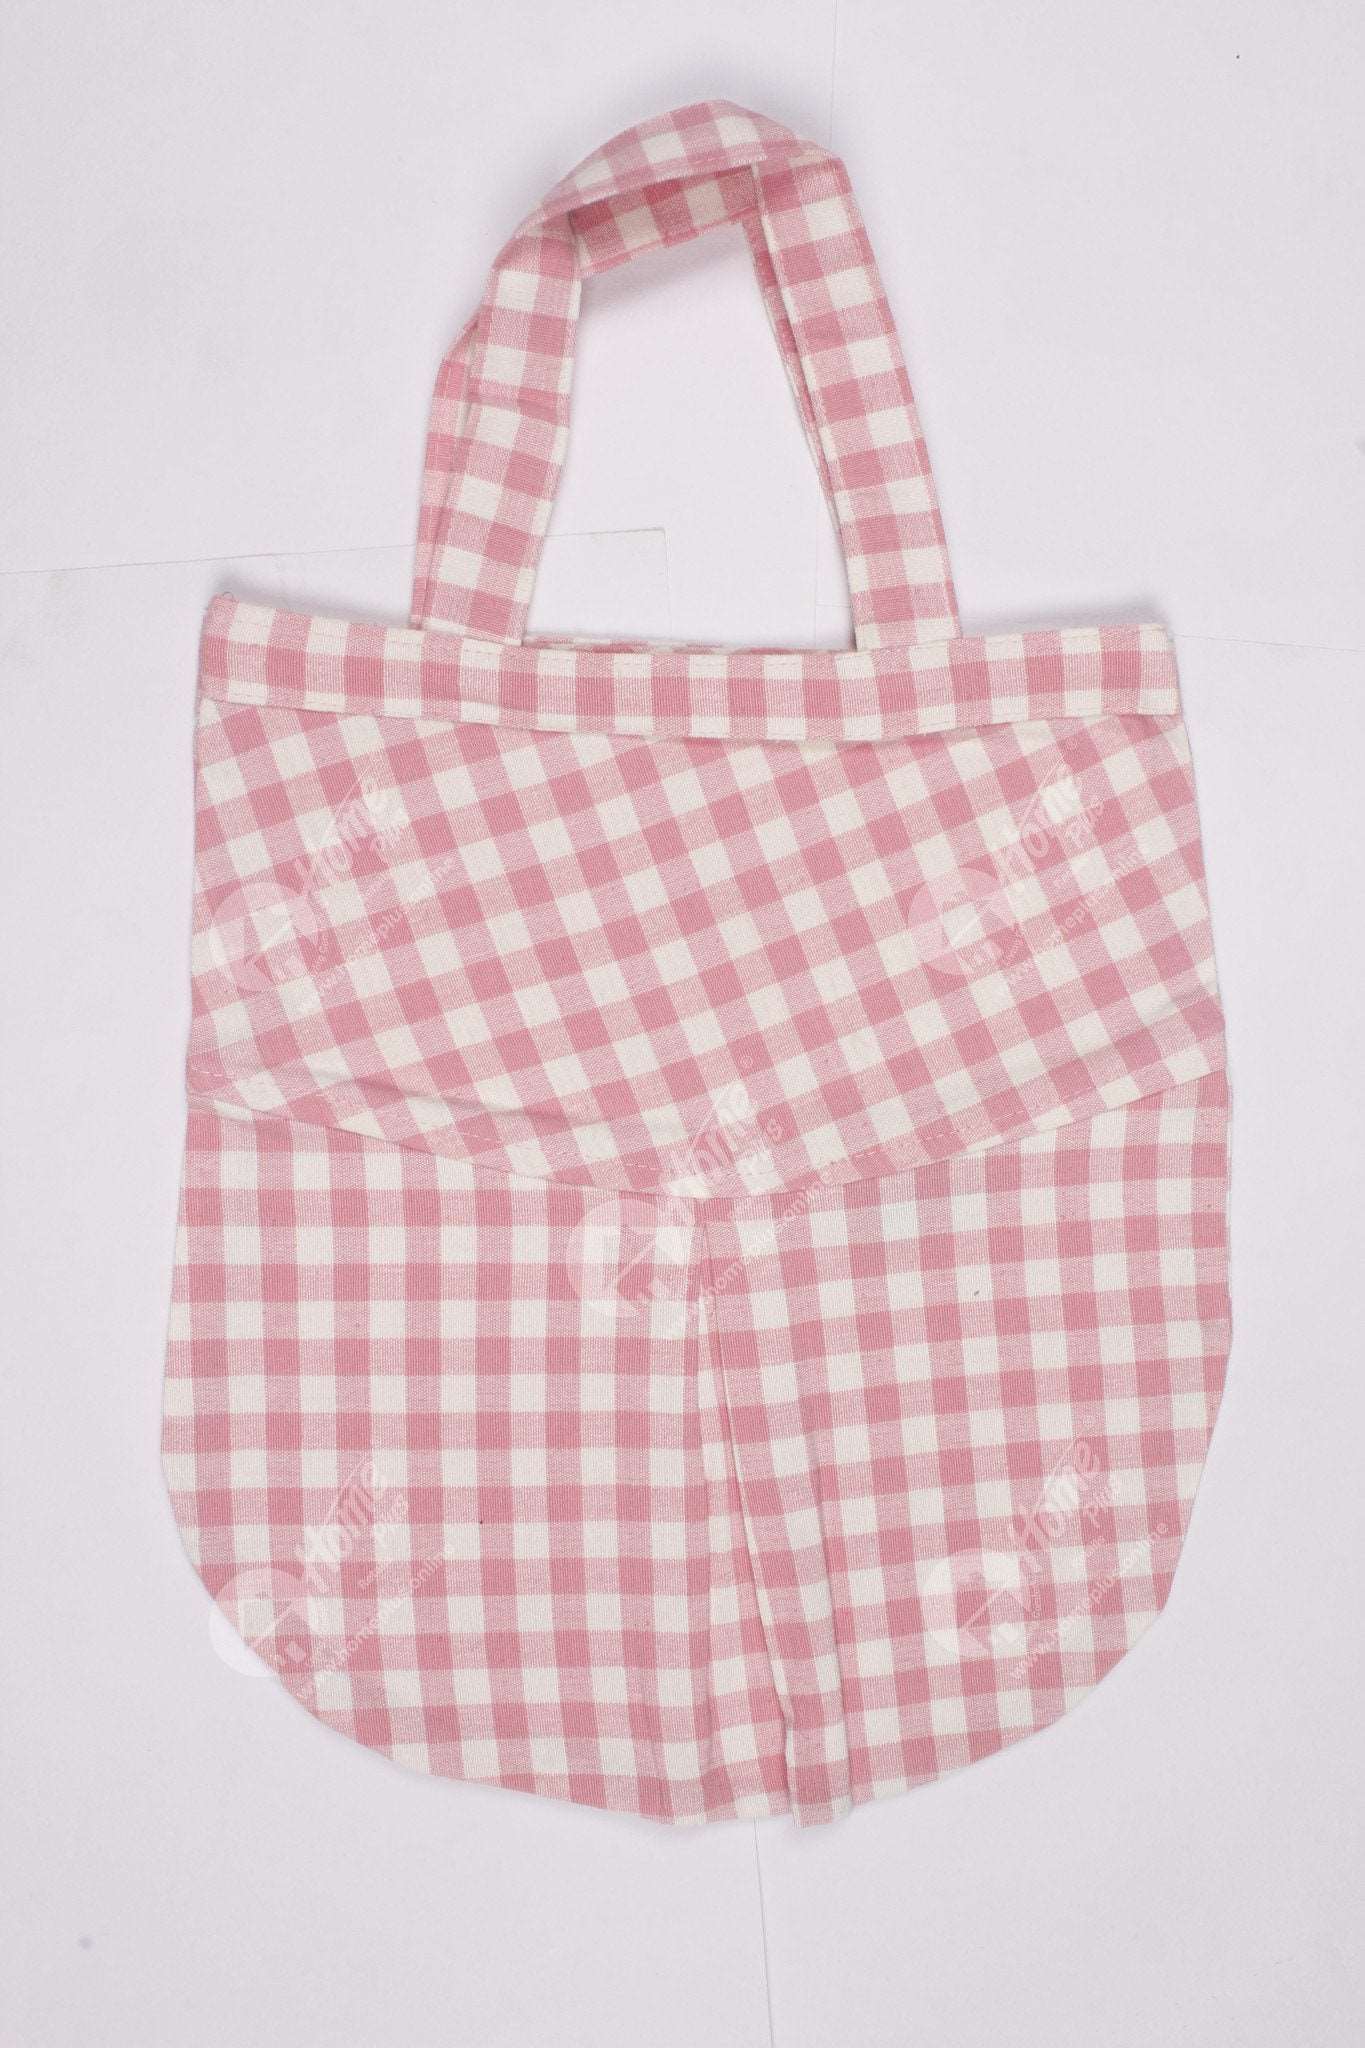 Fancy bag - Gingham Check Pink Oval